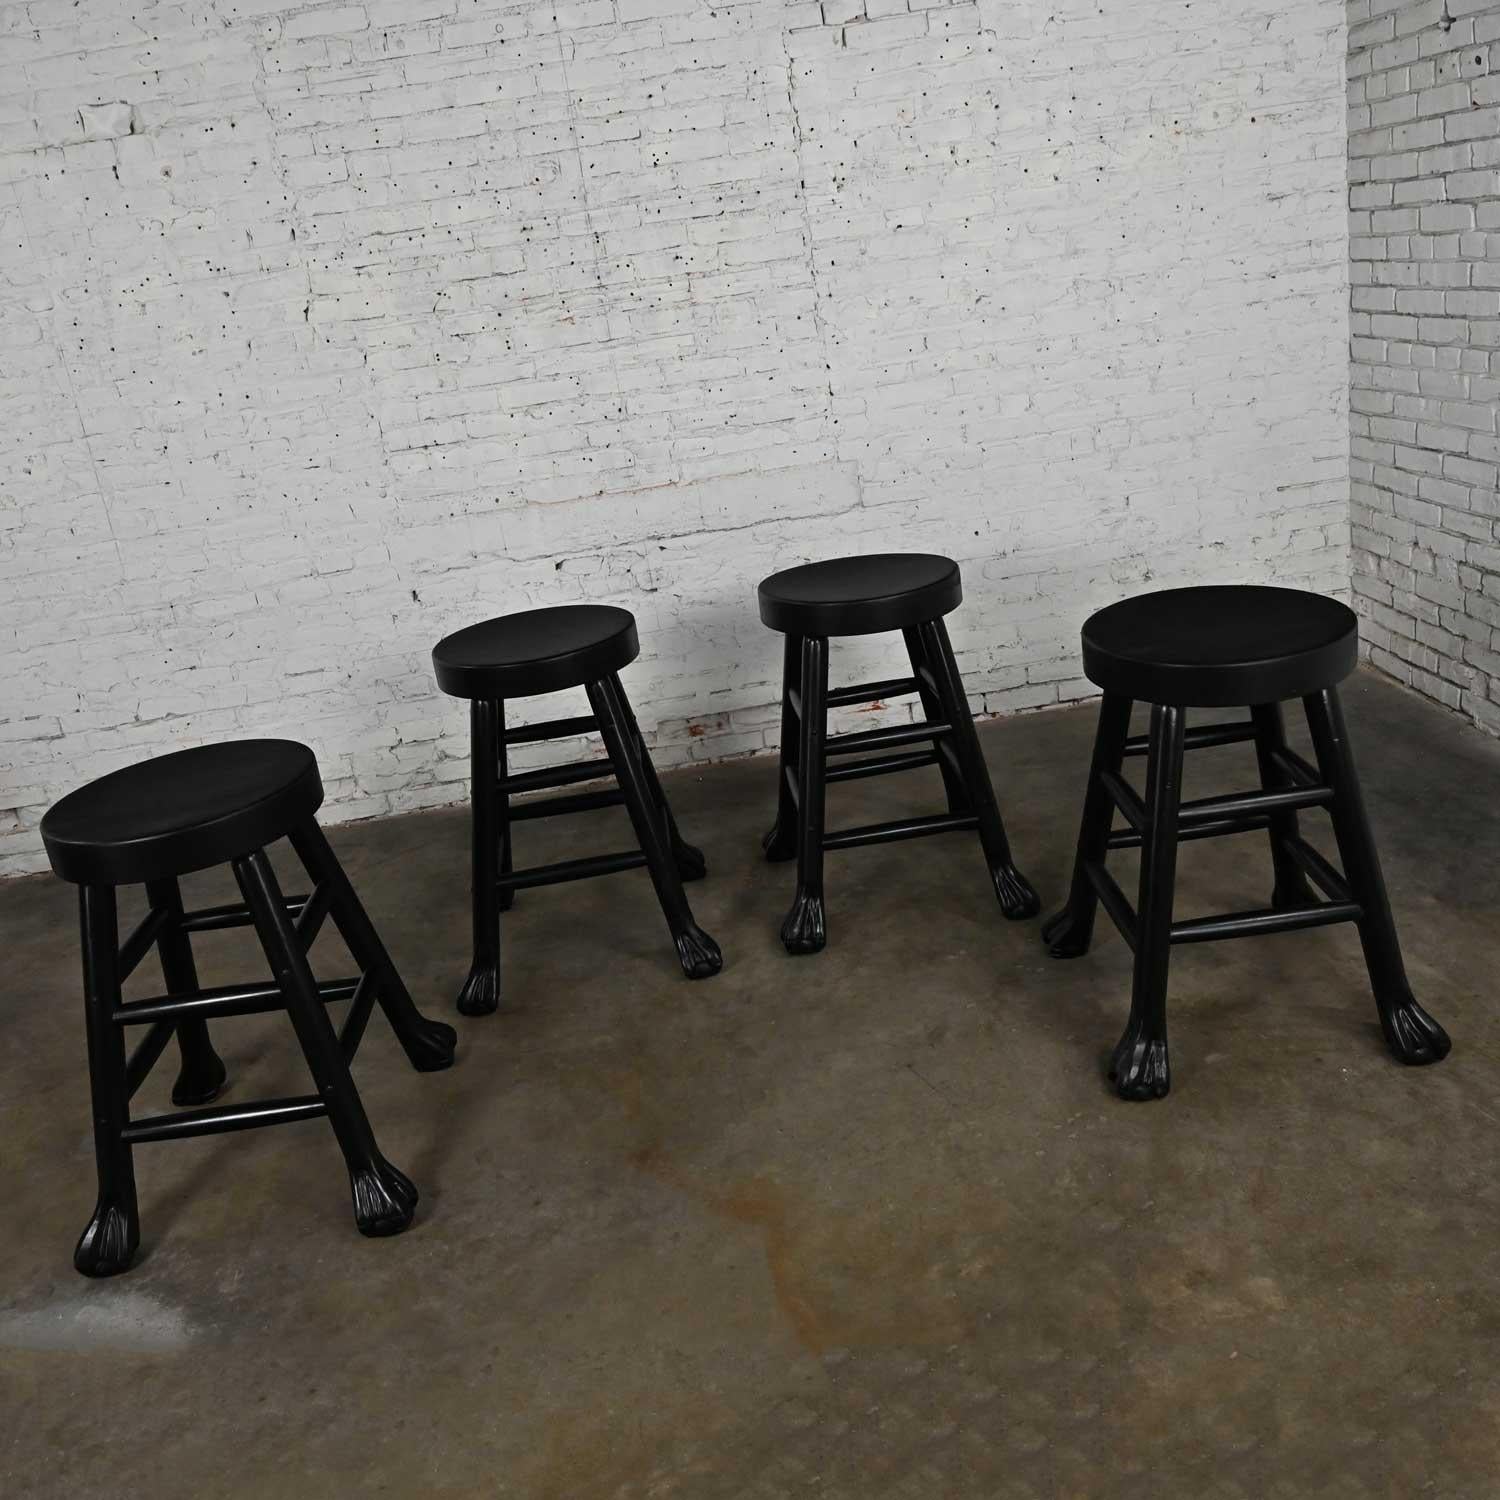 Vintage Rustic Blackened Solid Hardwood Chunky Claw Foot Barstools Set of 4 In Good Condition For Sale In Topeka, KS